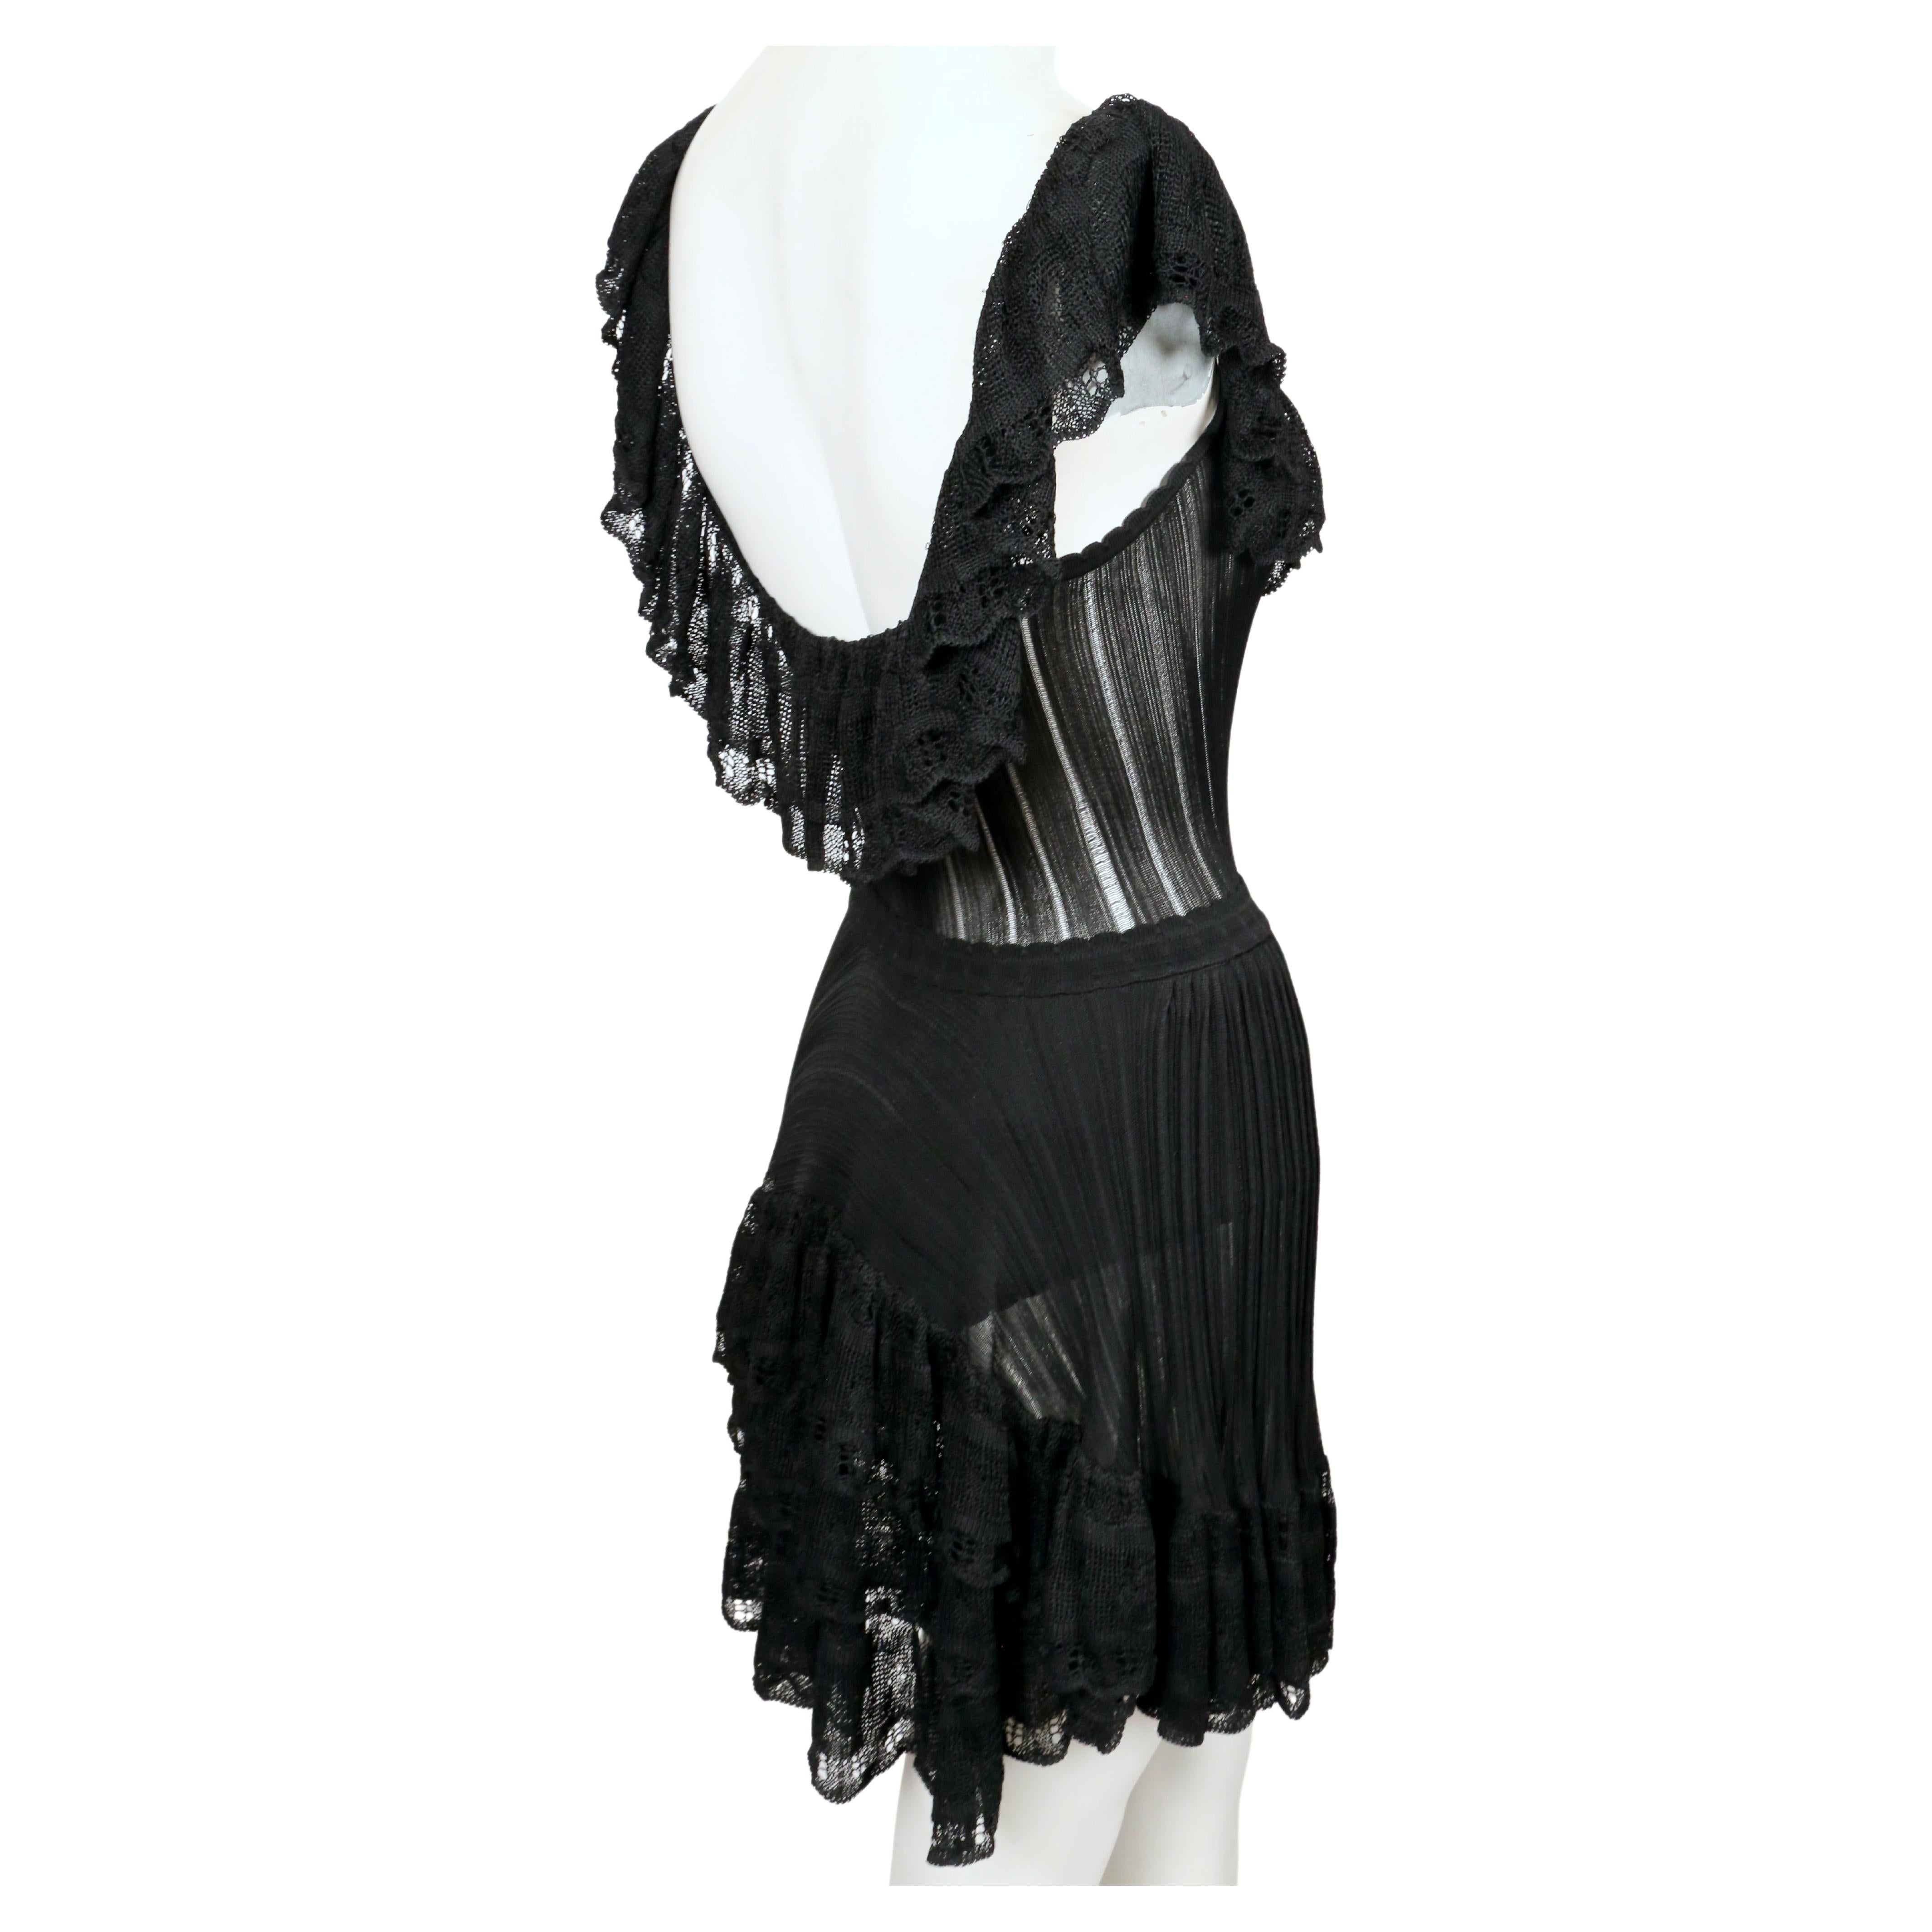  1992 AZZEDINE ALAIA black lace RUNWAY dress with bustle For Sale 1